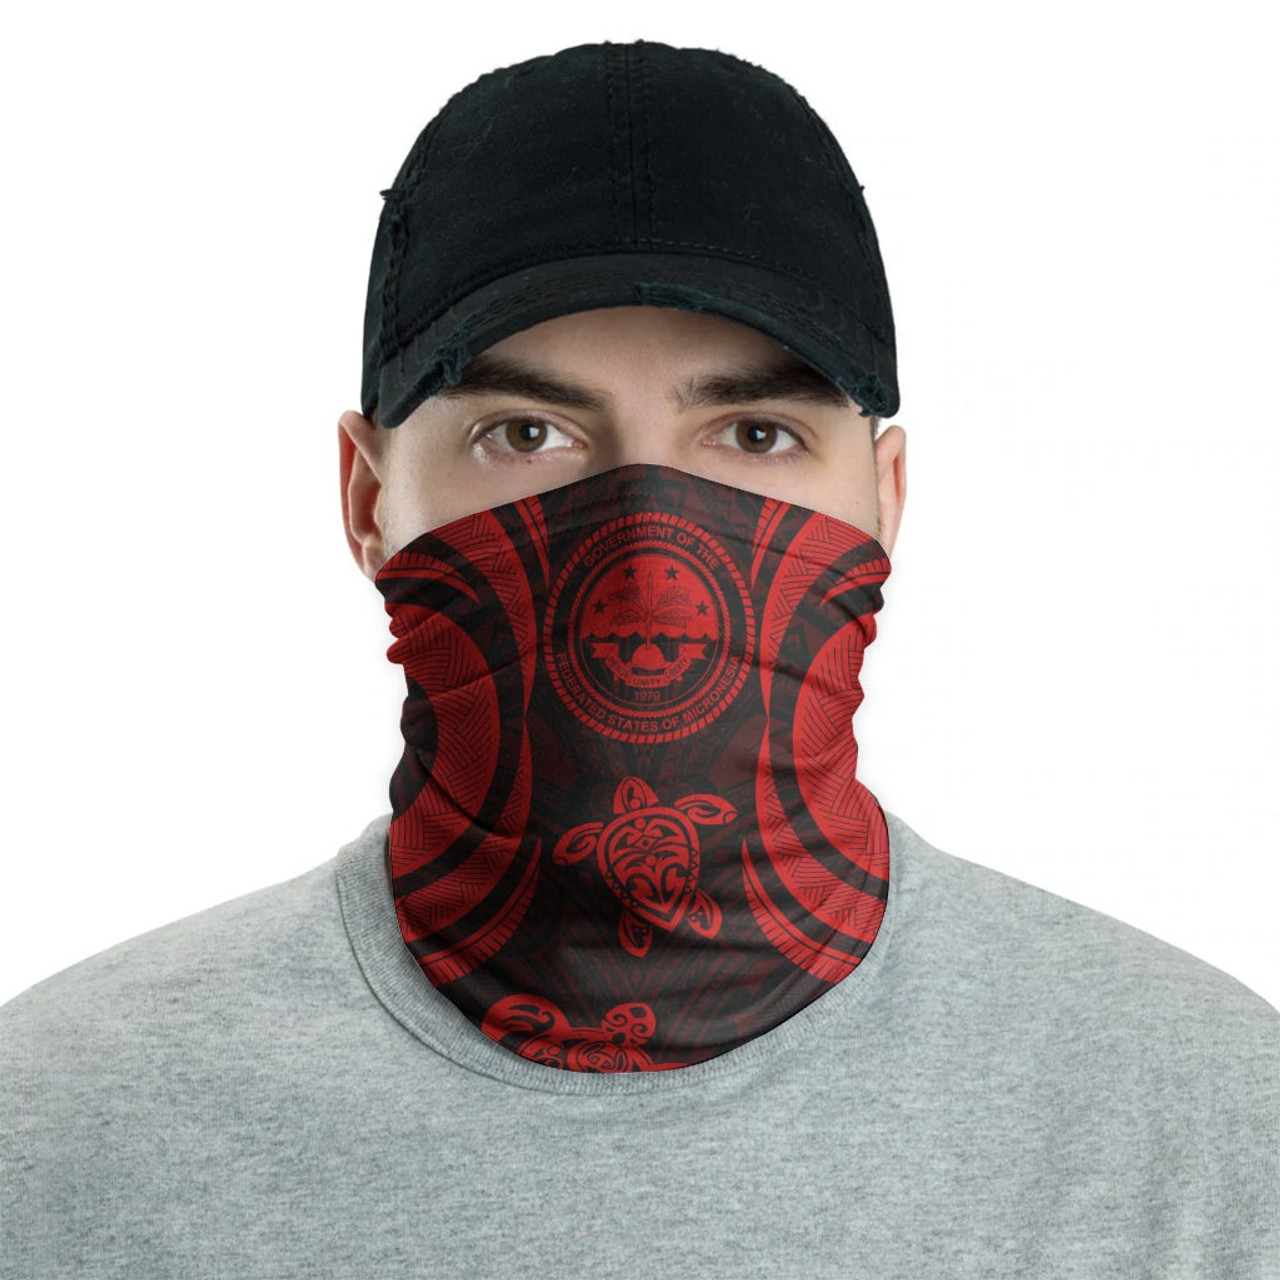 Federated States of Micronesia Neck Gaiter - Turtle Tentacle Red 2